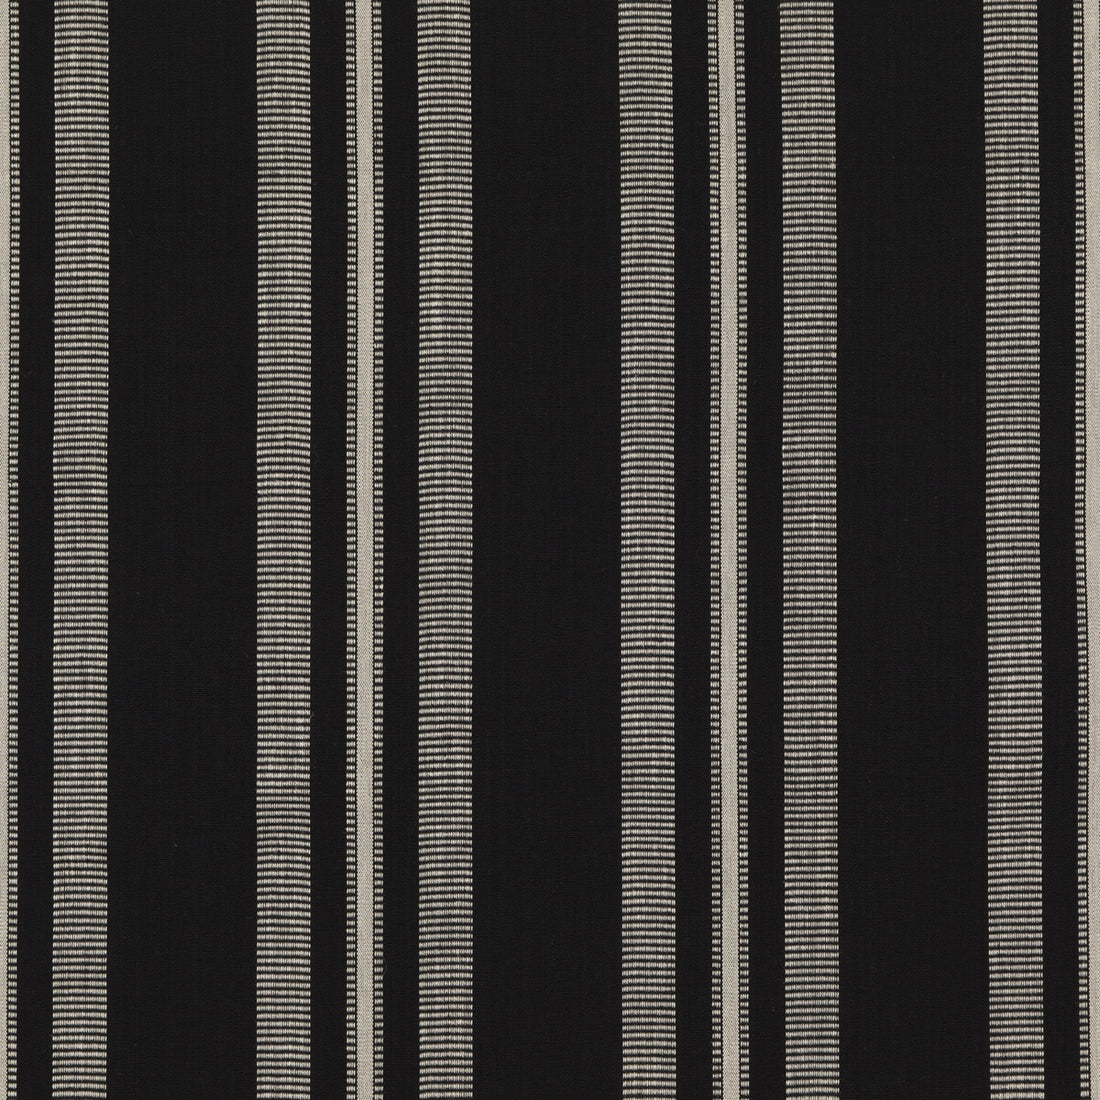 Stanton fabric in ebony color - pattern ED85303.955.0 - by Threads in the Great Stripes collection